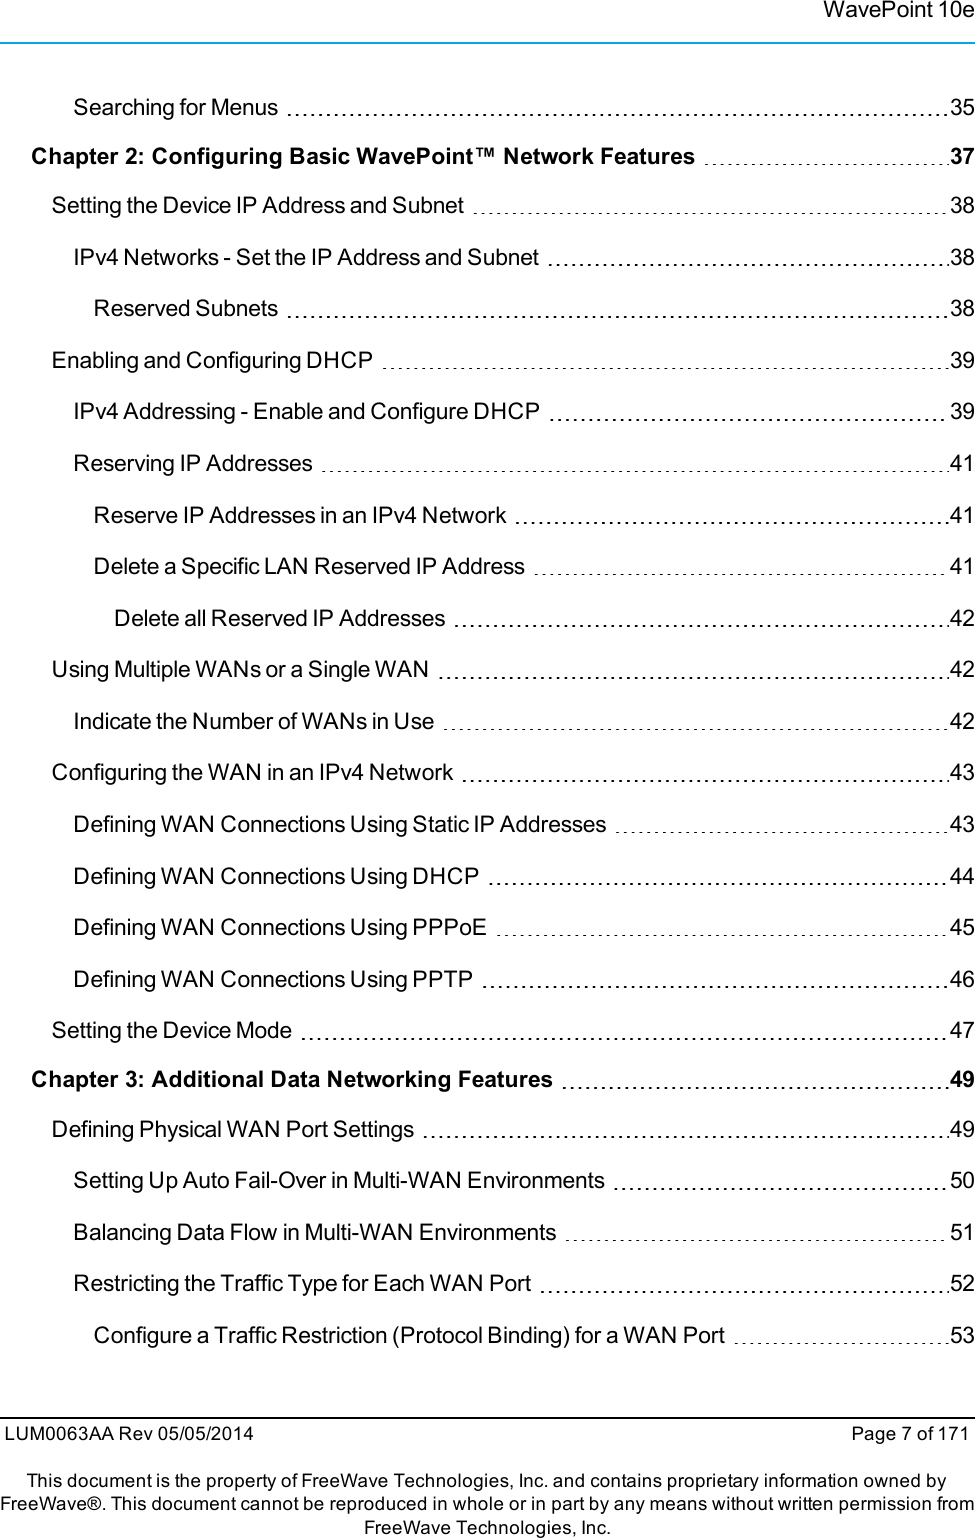 WavePoint 10eSearching for Menus 35Chapter 2: Configuring Basic WavePoint™ Network Features 37Setting the Device IP Address and Subnet 38IPv4 Networks - Set the IP Address and Subnet 38Reserved Subnets 38Enabling and Configuring DHCP 39IPv4 Addressing - Enable and Configure DHCP 39Reserving IP Addresses 41Reserve IP Addresses in an IPv4 Network 41Delete a Specific LAN Reserved IP Address 41Delete all Reserved IP Addresses 42Using Multiple WANs or a Single WAN 42Indicate the Number of WANs in Use 42Configuring the WAN in an IPv4 Network 43Defining WAN Connections Using Static IP Addresses 43Defining WAN Connections Using DHCP 44Defining WAN Connections Using PPPoE 45Defining WAN Connections Using PPTP 46Setting the Device Mode 47Chapter 3: Additional Data Networking Features 49Defining Physical WAN Port Settings 49Setting Up Auto Fail-Over in Multi-WAN Environments 50Balancing Data Flow in Multi-WAN Environments 51Restricting the Traffic Type for Each WAN Port 52Configure a Traffic Restriction (Protocol Binding) for a WAN Port 53LUM0063AA Rev 05/05/2014 Page 7 of 171This document is the property of FreeWave Technologies, Inc. and contains proprietary information owned byFreeWave®. This document cannot be reproduced in whole or in part by any means without written permission fromFreeWave Technologies, Inc.